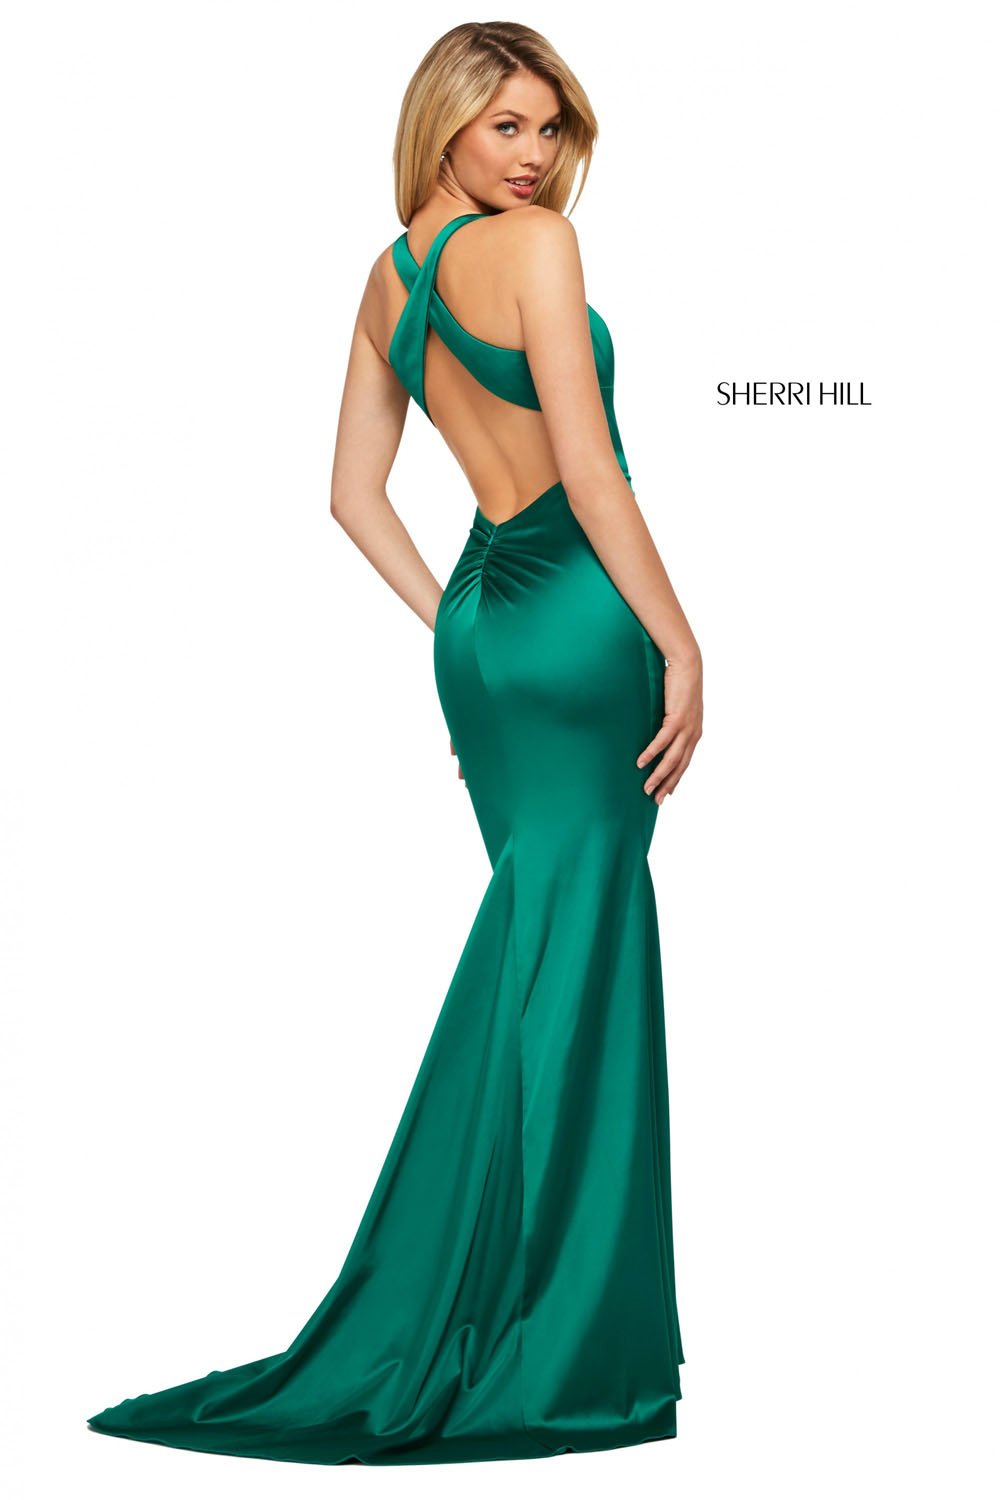 Sherri Hill 53392 dress images in these colors: Blush, Emerald, Rose, Ruby, Black, Berry, Teal, Royal, Navy, Red.